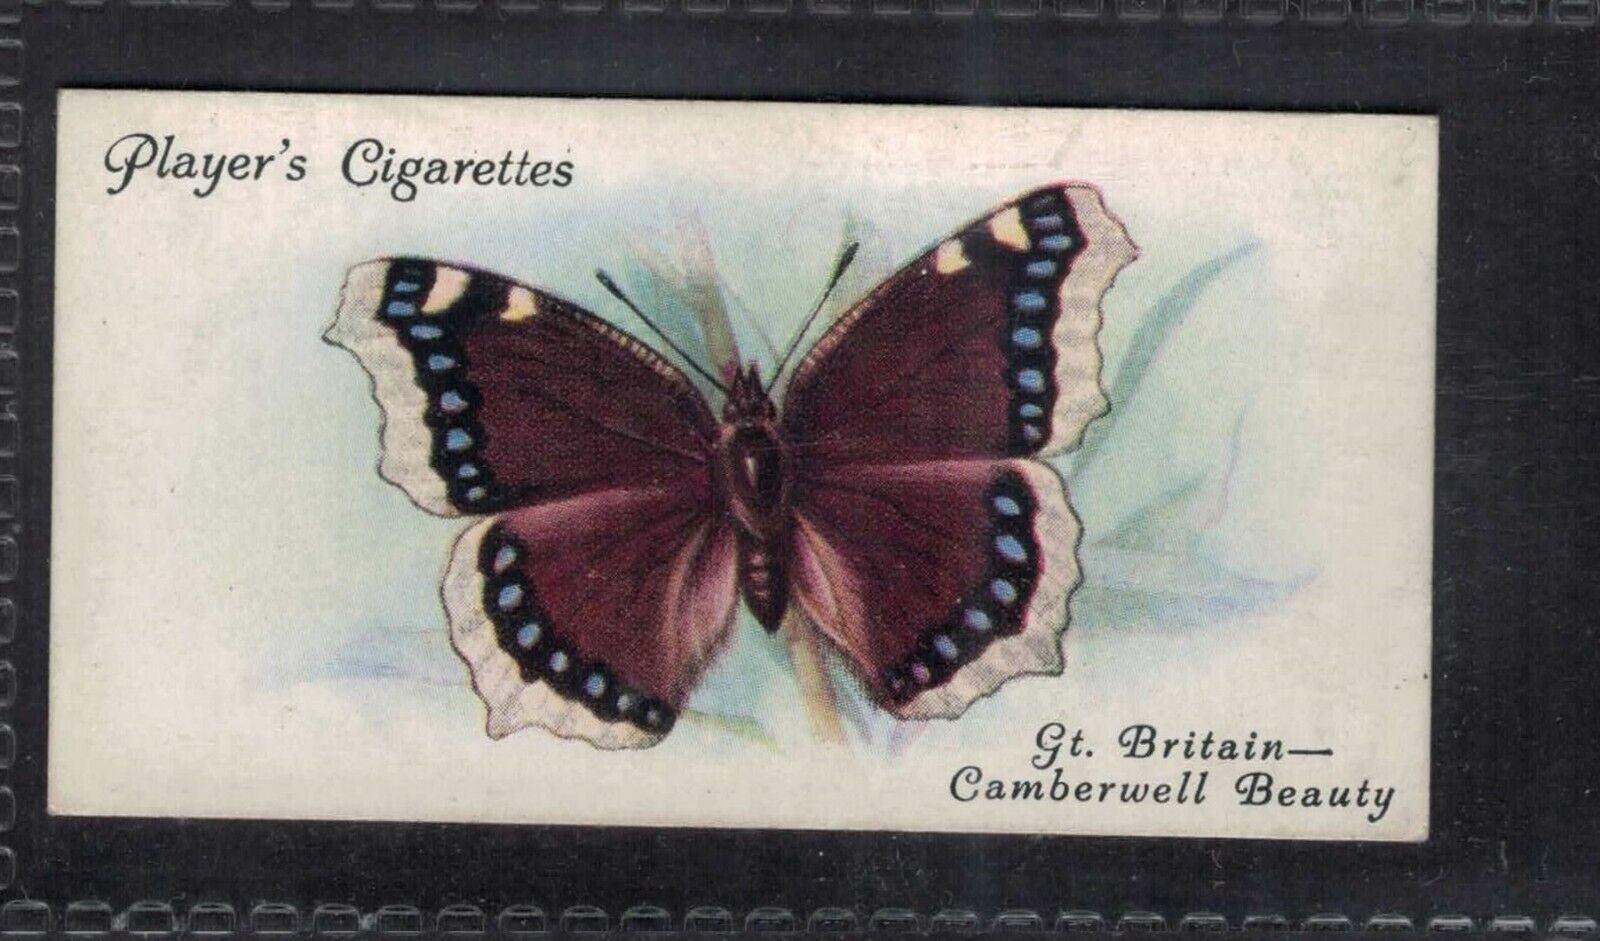 CAMBERWELL BEAUTY - 90 + year old English Tobacco Card # 5